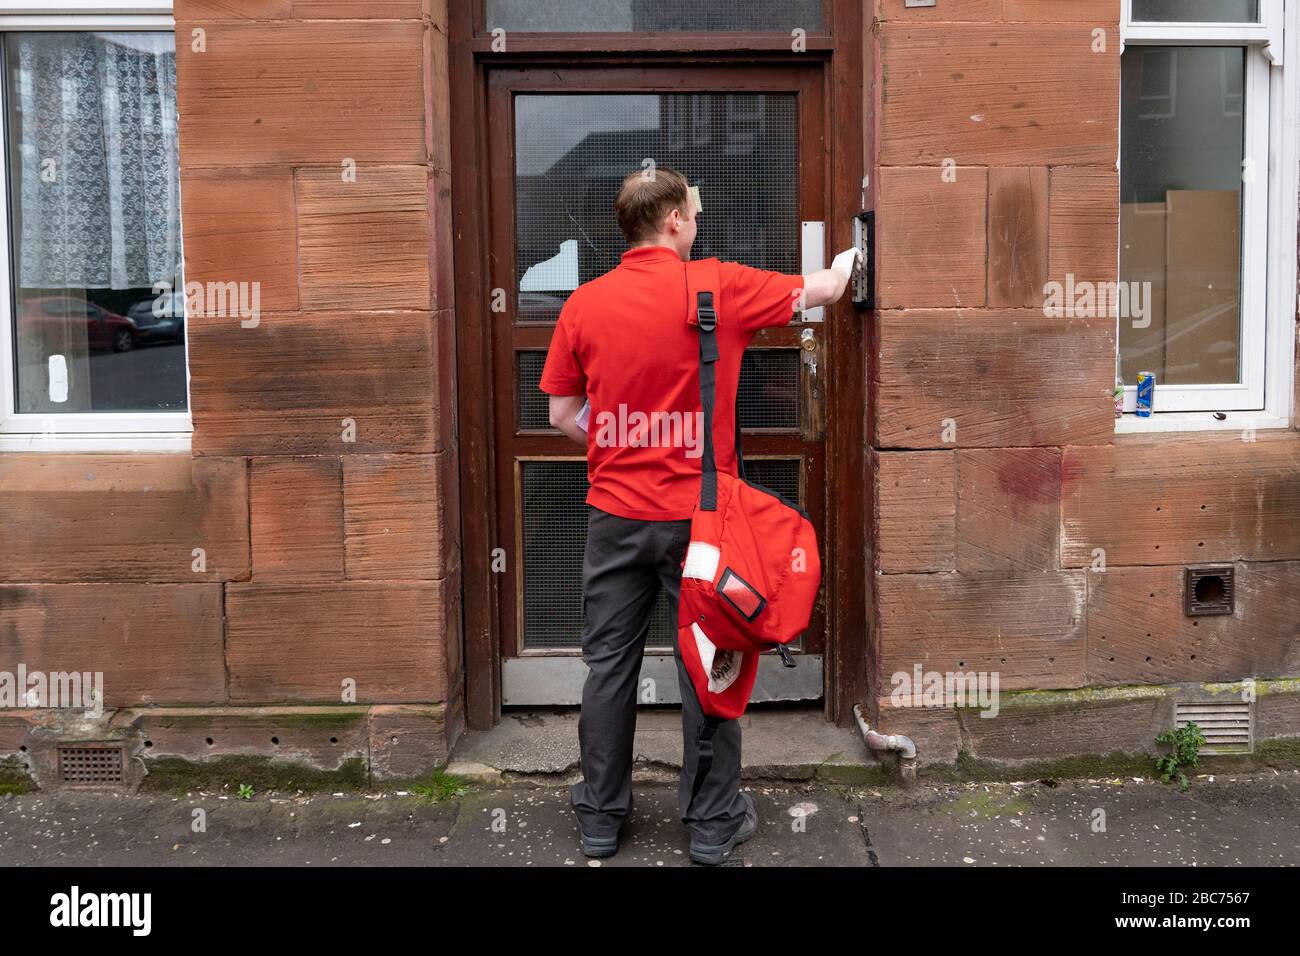 Glasgow, Scotland, UK. 3 April, 2020. Images from the southside of Glasgow at the end of the second week of Coronavirus lockdown. Pictured; Royal Mail postman making deliveries to tenement in Govanhill . Iain Masterton/Alamy Live News Stock Photo